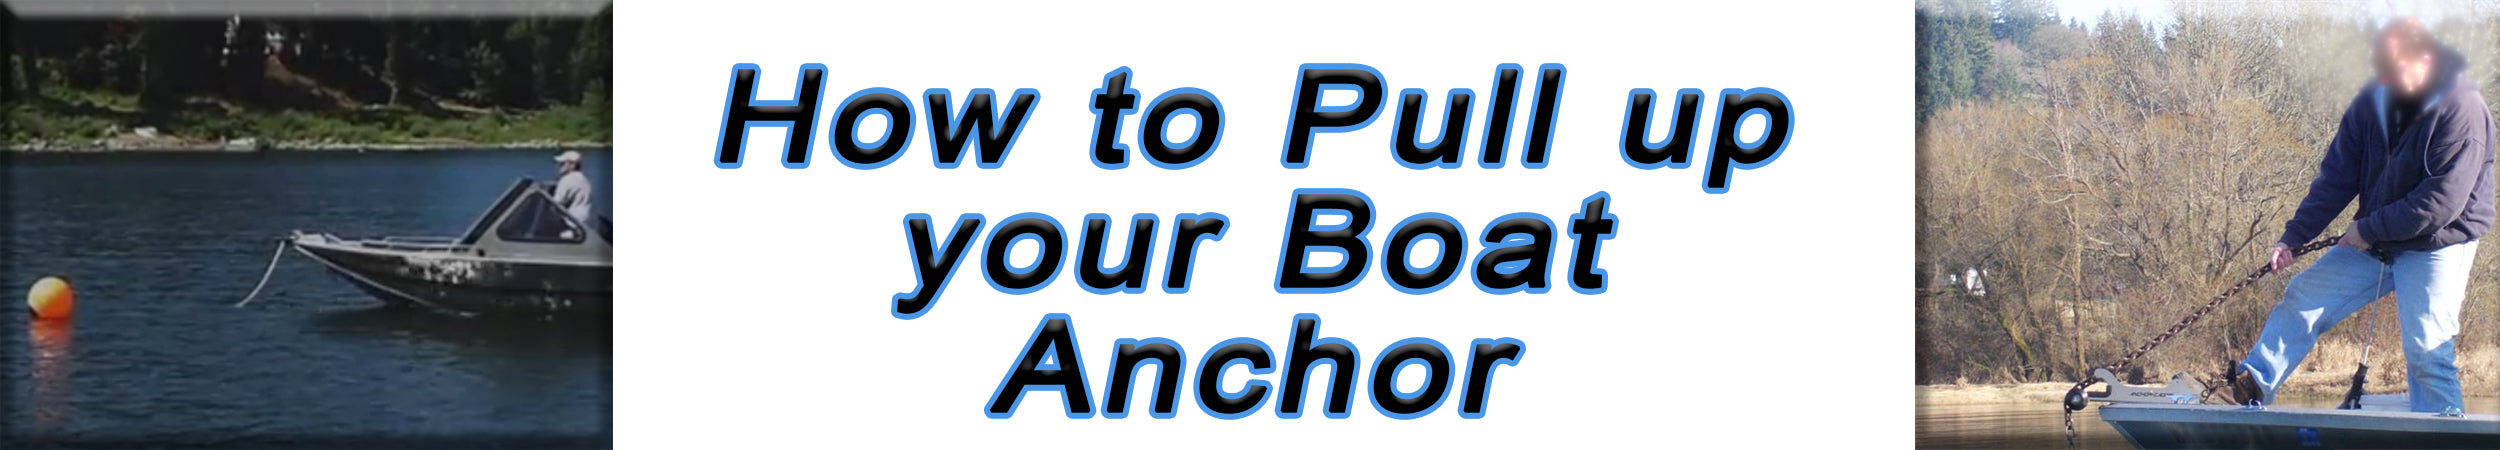 How to pull up your boat anchor